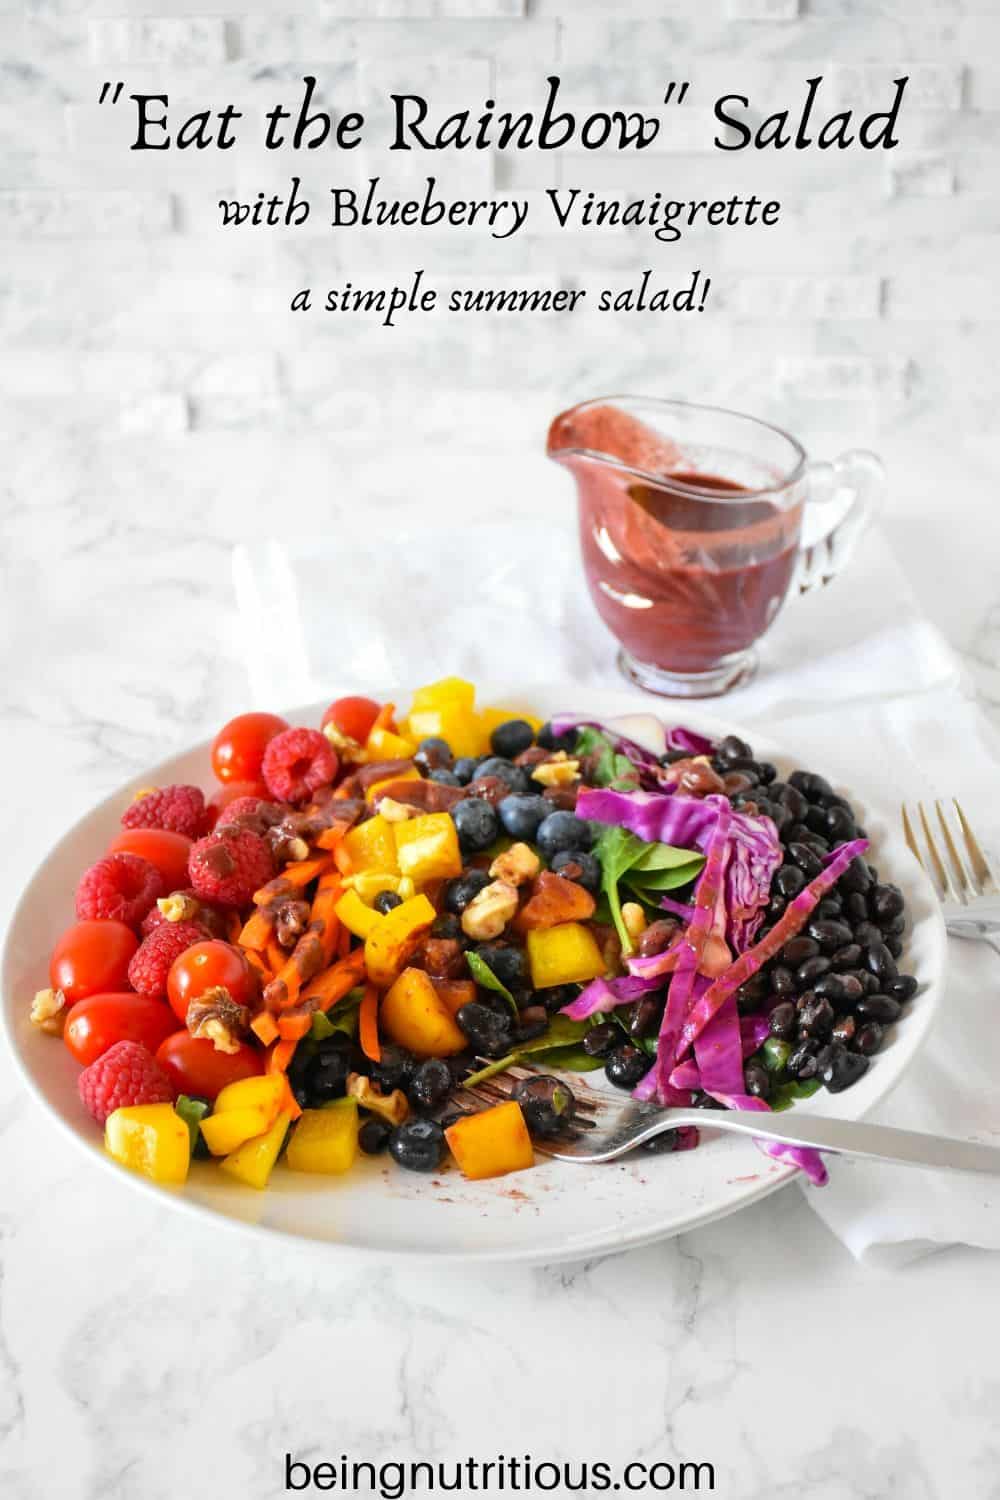 Rainbow salad on a plate, with blueberry vinaigrette dressing poured on, and several bites take from salad.